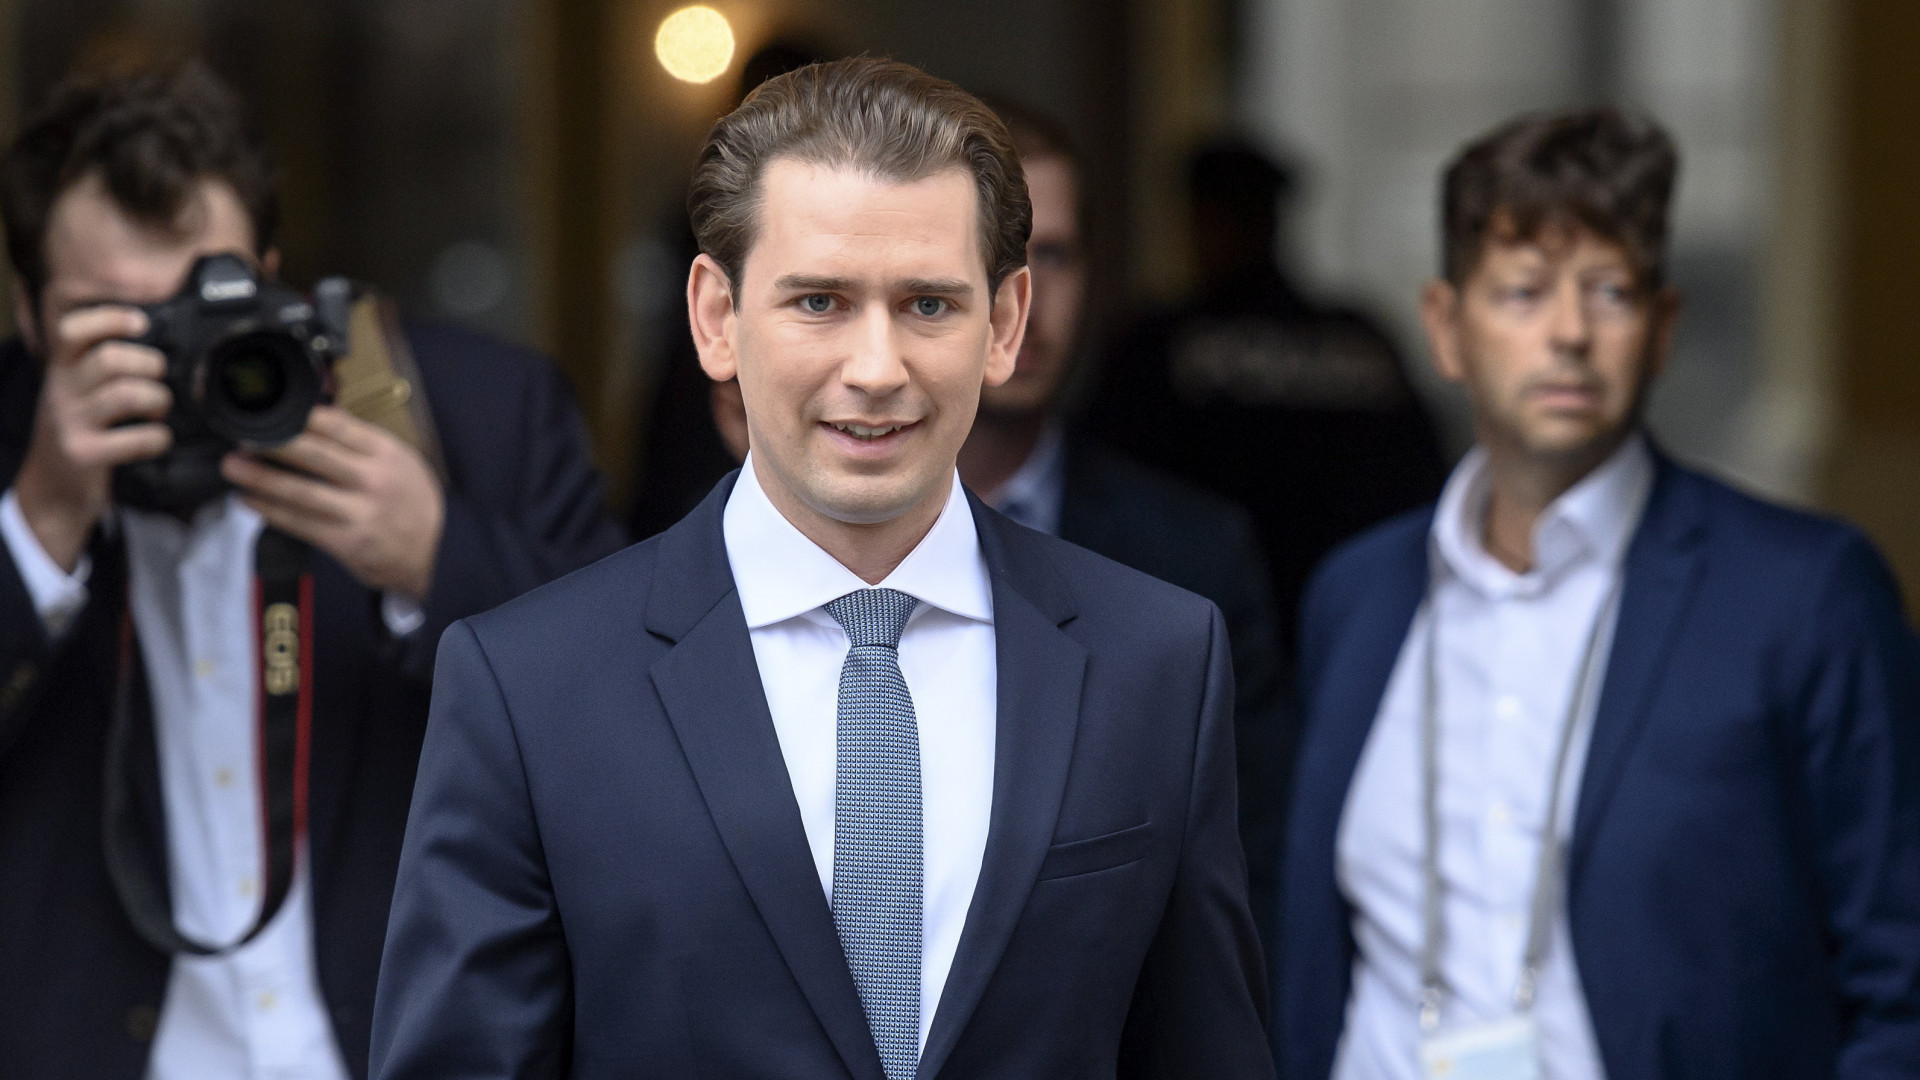 Austrian opposition is disappointed: Kurz continues to hold power in his hands